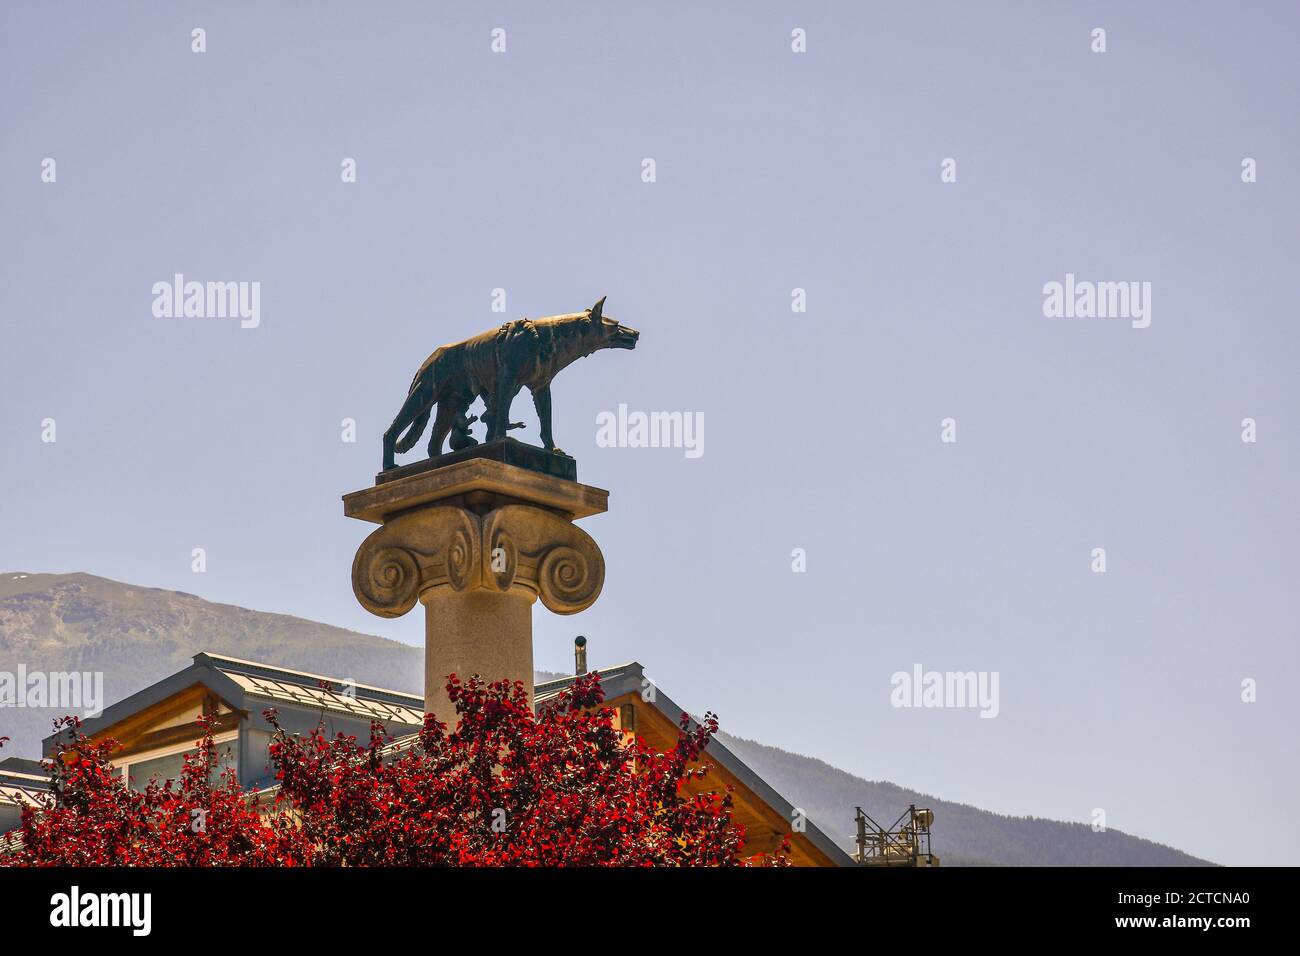 Top of the bronze statue representing the mythological Capitoline Wolf with Romulus and Remus (1939) in Republic Square, Aosta, Aosta Valley, Italy Stock Photo